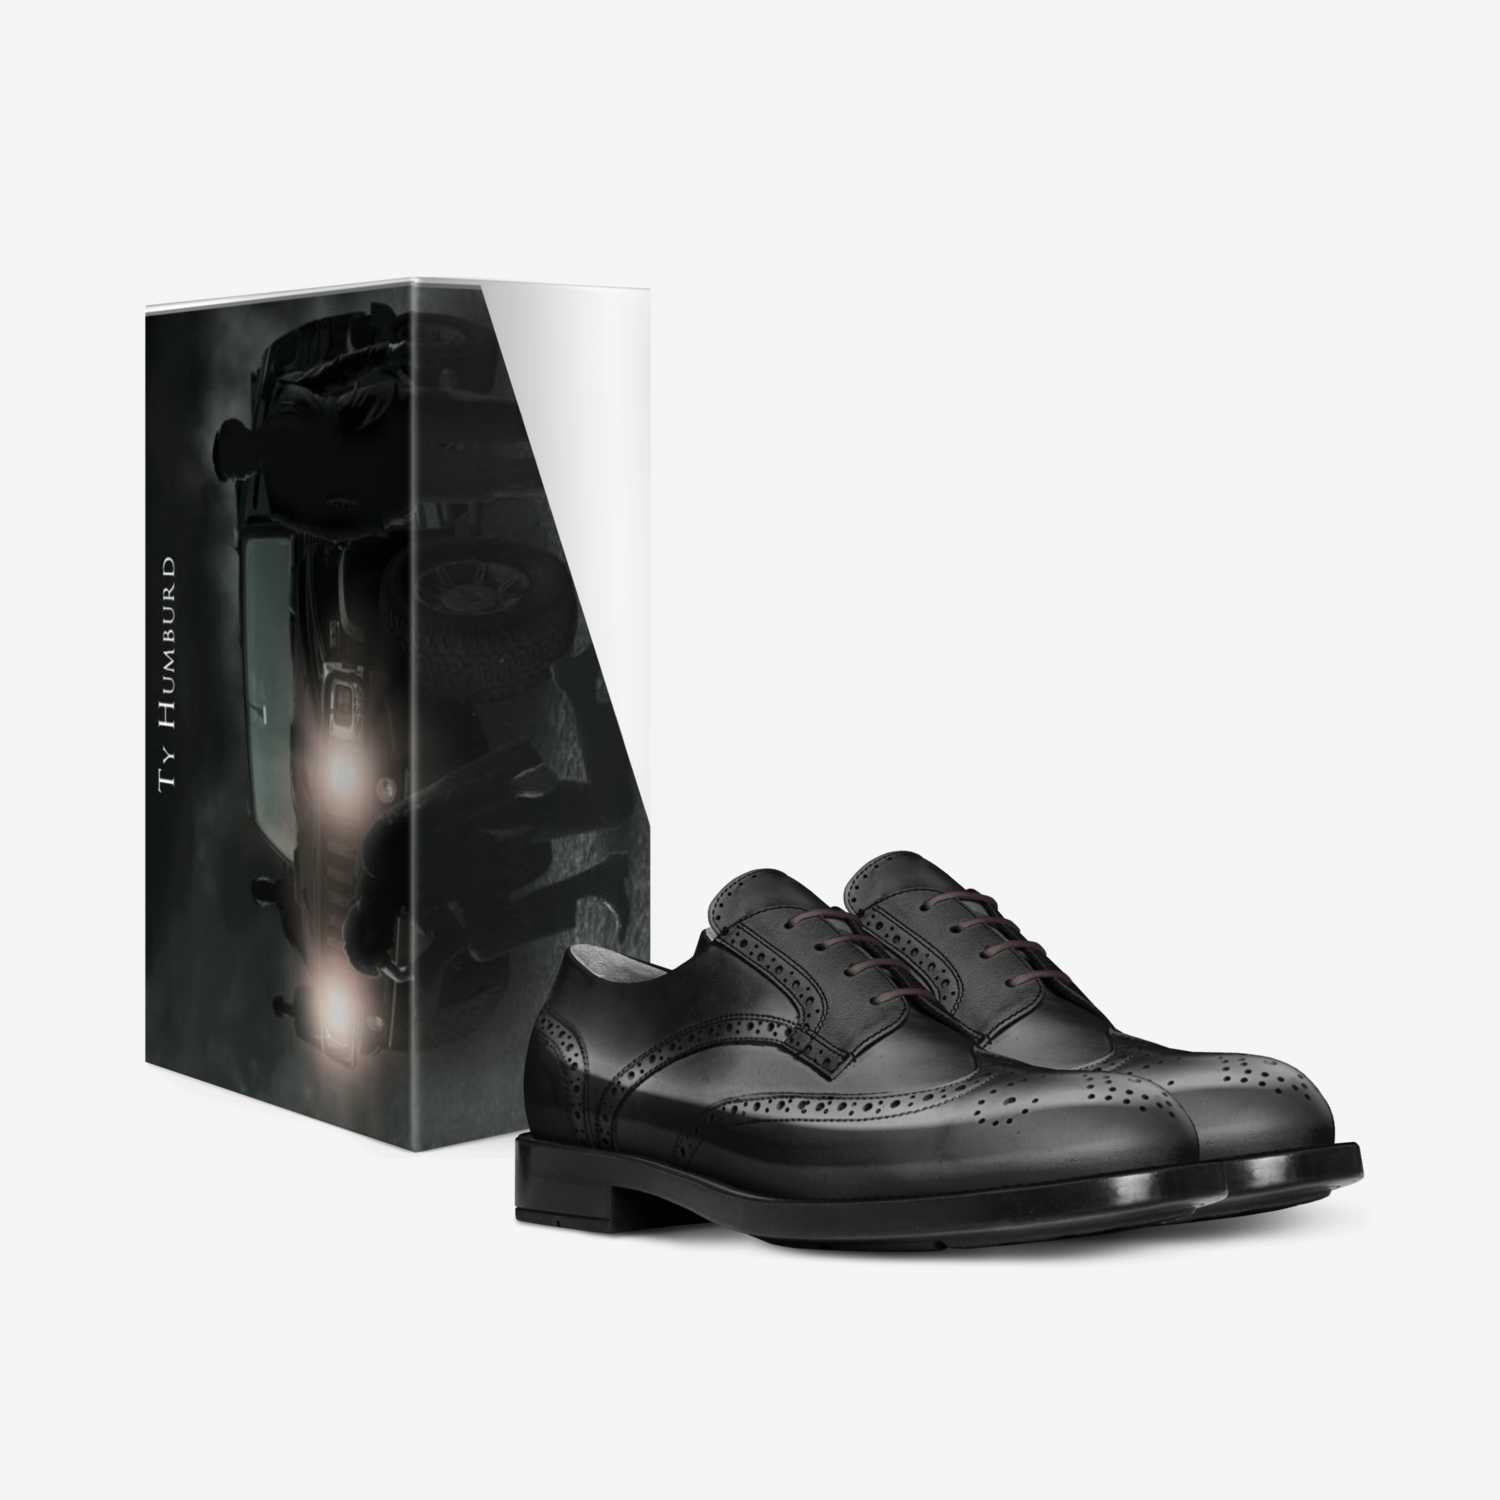 Murdered Out  custom made in Italy shoes by Ty Humburd | Box view